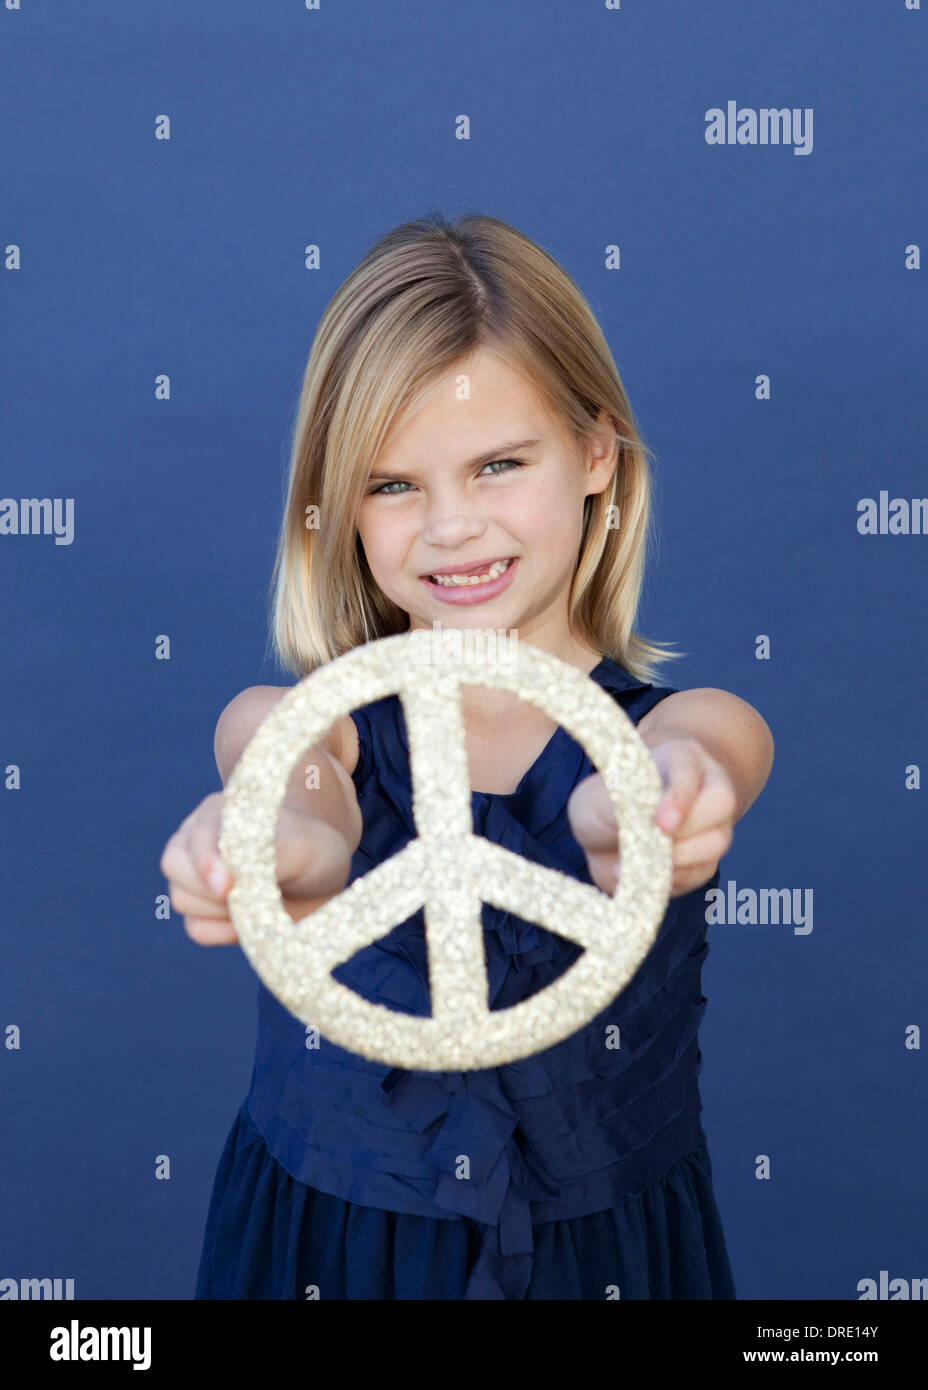 Portrait of young girl holding up peace sign Banque D'Images